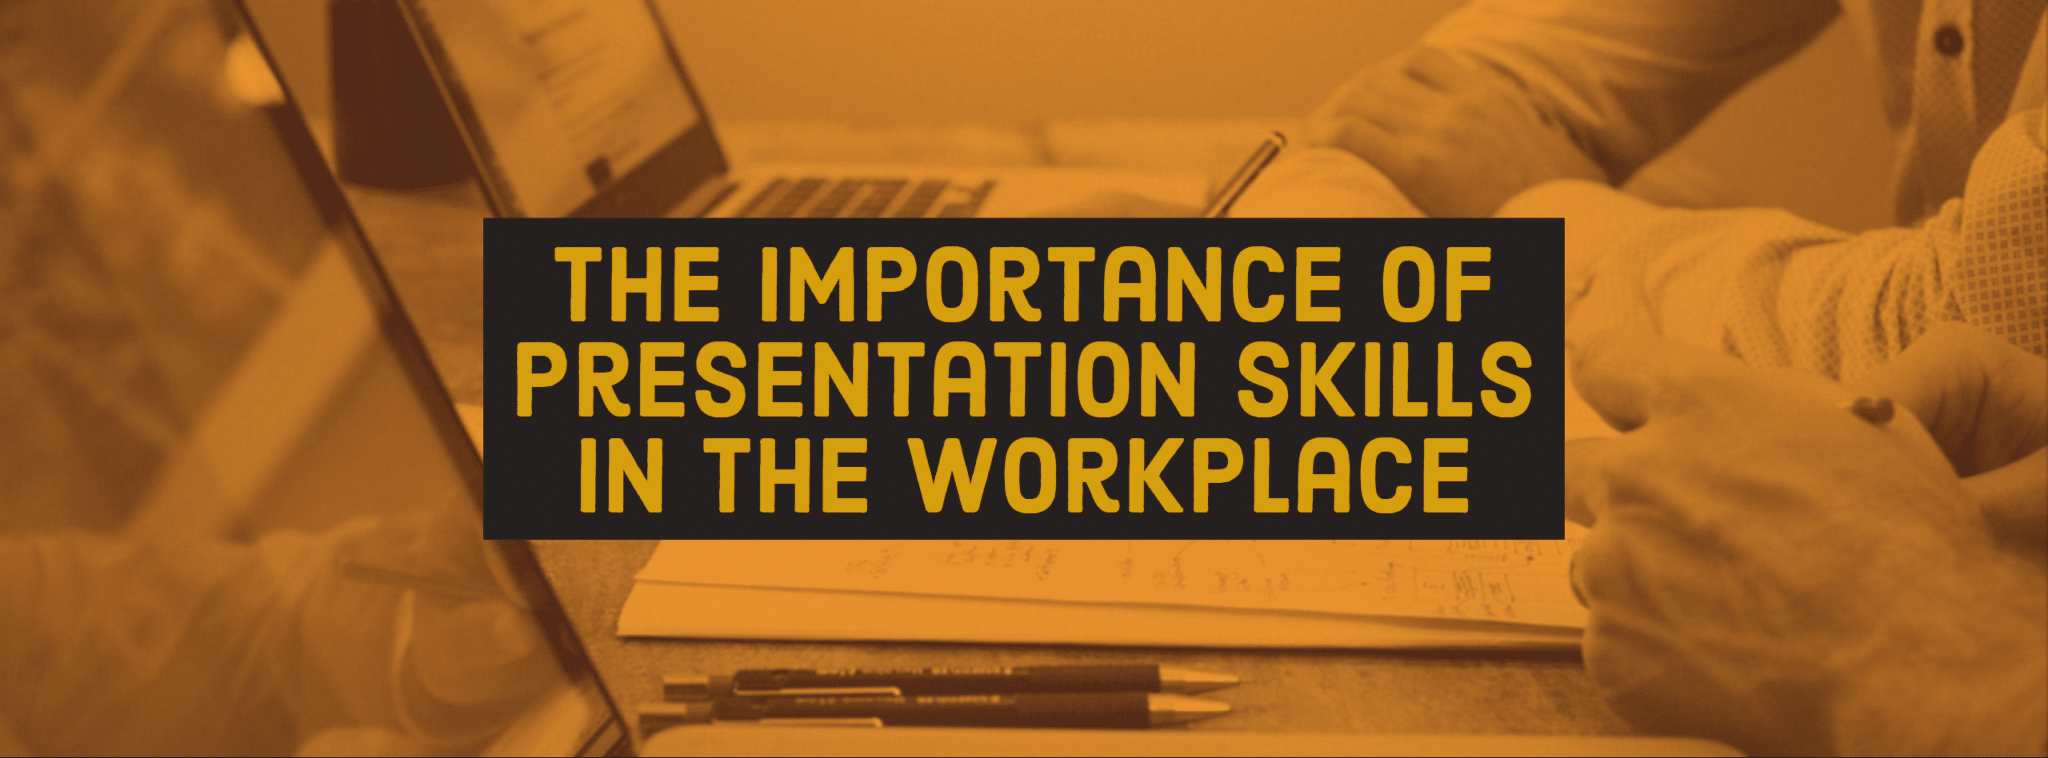 https://www.fearlesspresentations.com/wp-content/uploads/2019/08/The-Importance-of-Presentation-Skills-in-the-Workplace.png